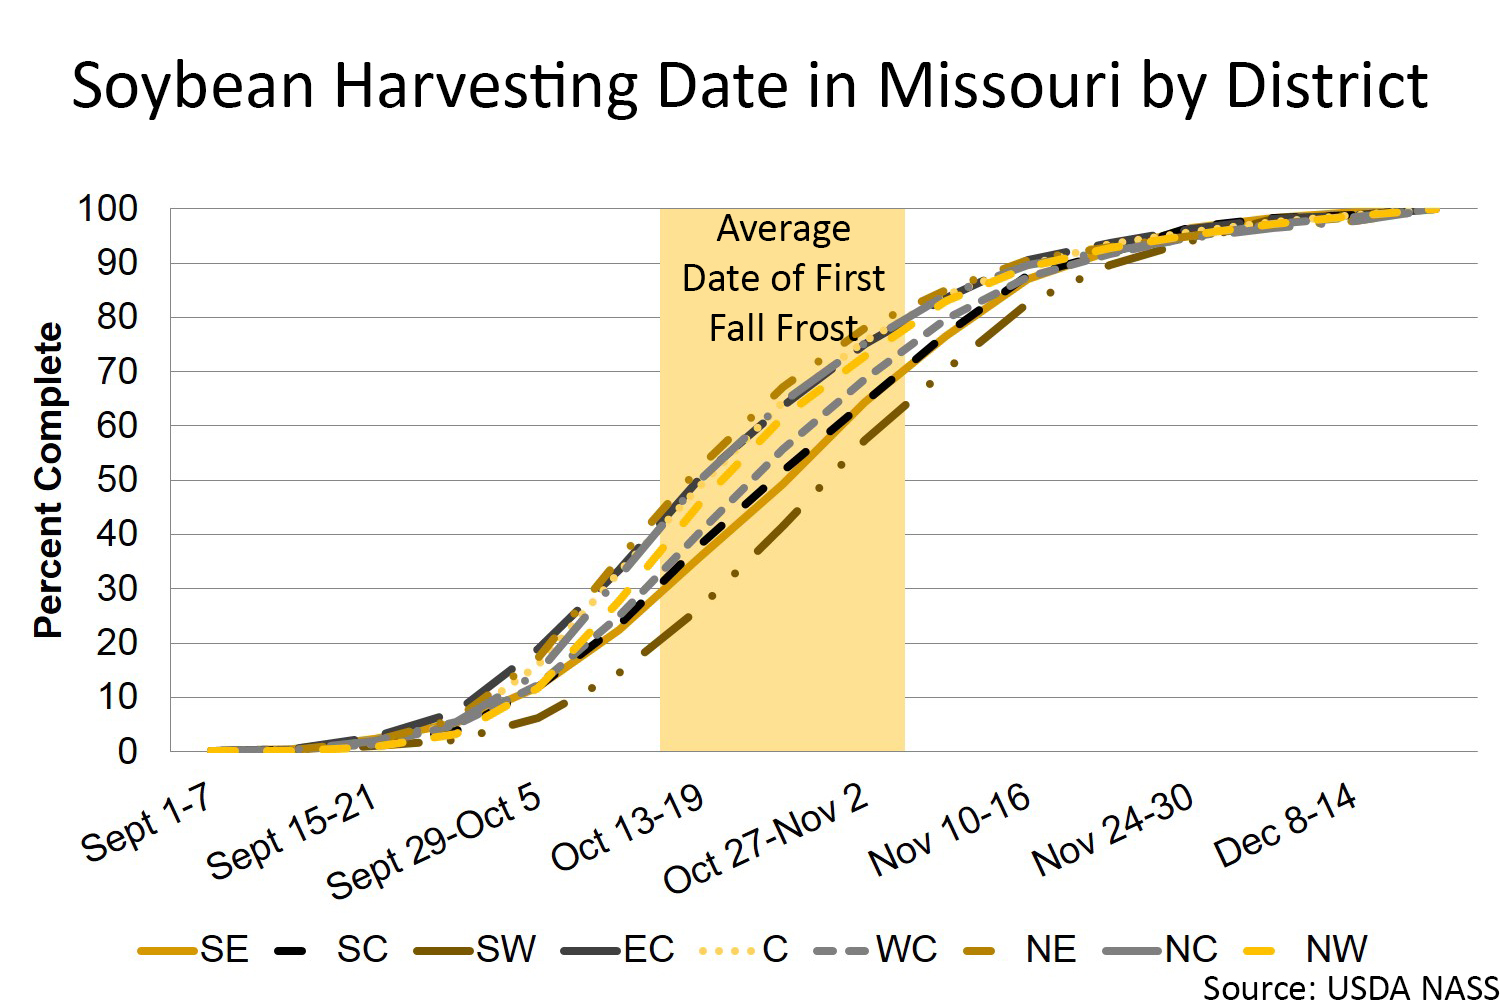 Missouri soybean harvesting date by district chart